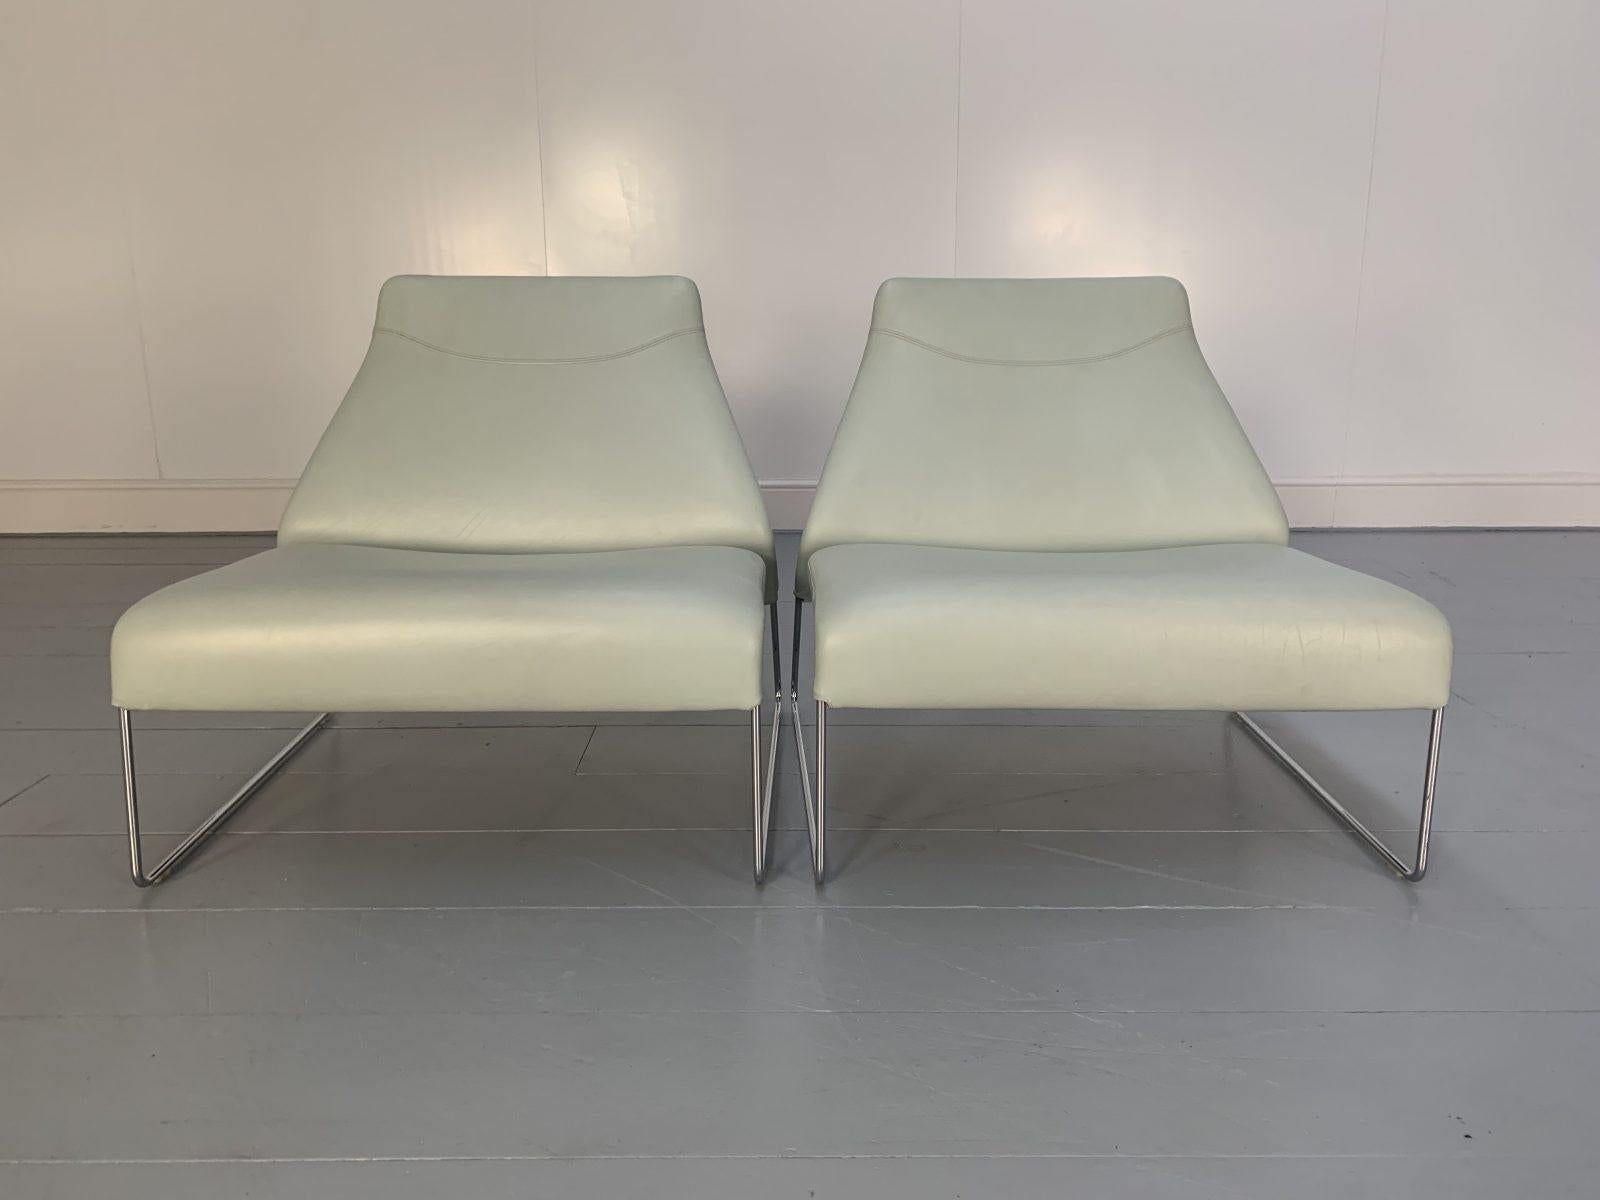 Contemporary Pair of B&B Italia “Lazy “05” Armchairs in Pale Grey Blue “Gamma” Leather For Sale